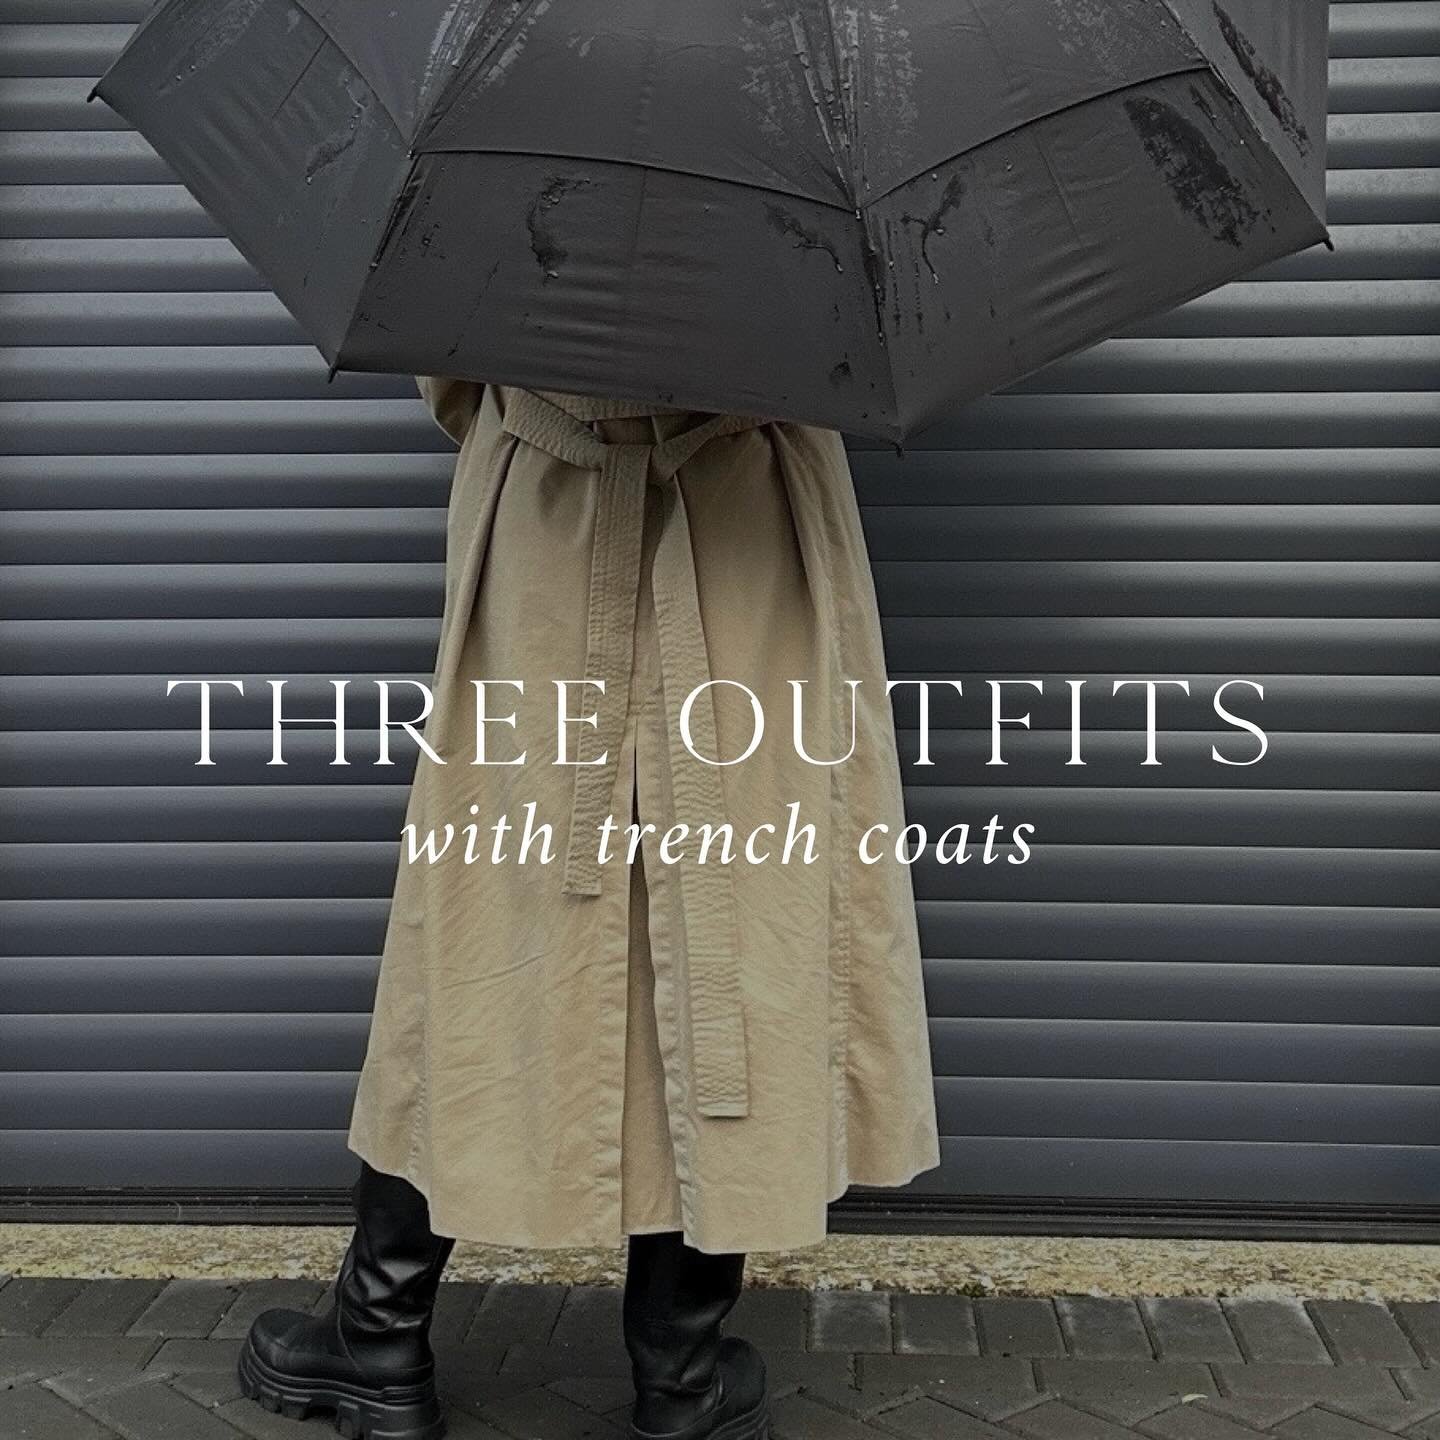 Here&rsquo;s 3 everyday looks for cloudy skies &amp; April showers... perfectly timed if the weather on the South Coast is anything to go by this morning! 
My trench still features heavily in current outfit rotation so, despite the appearance of spri